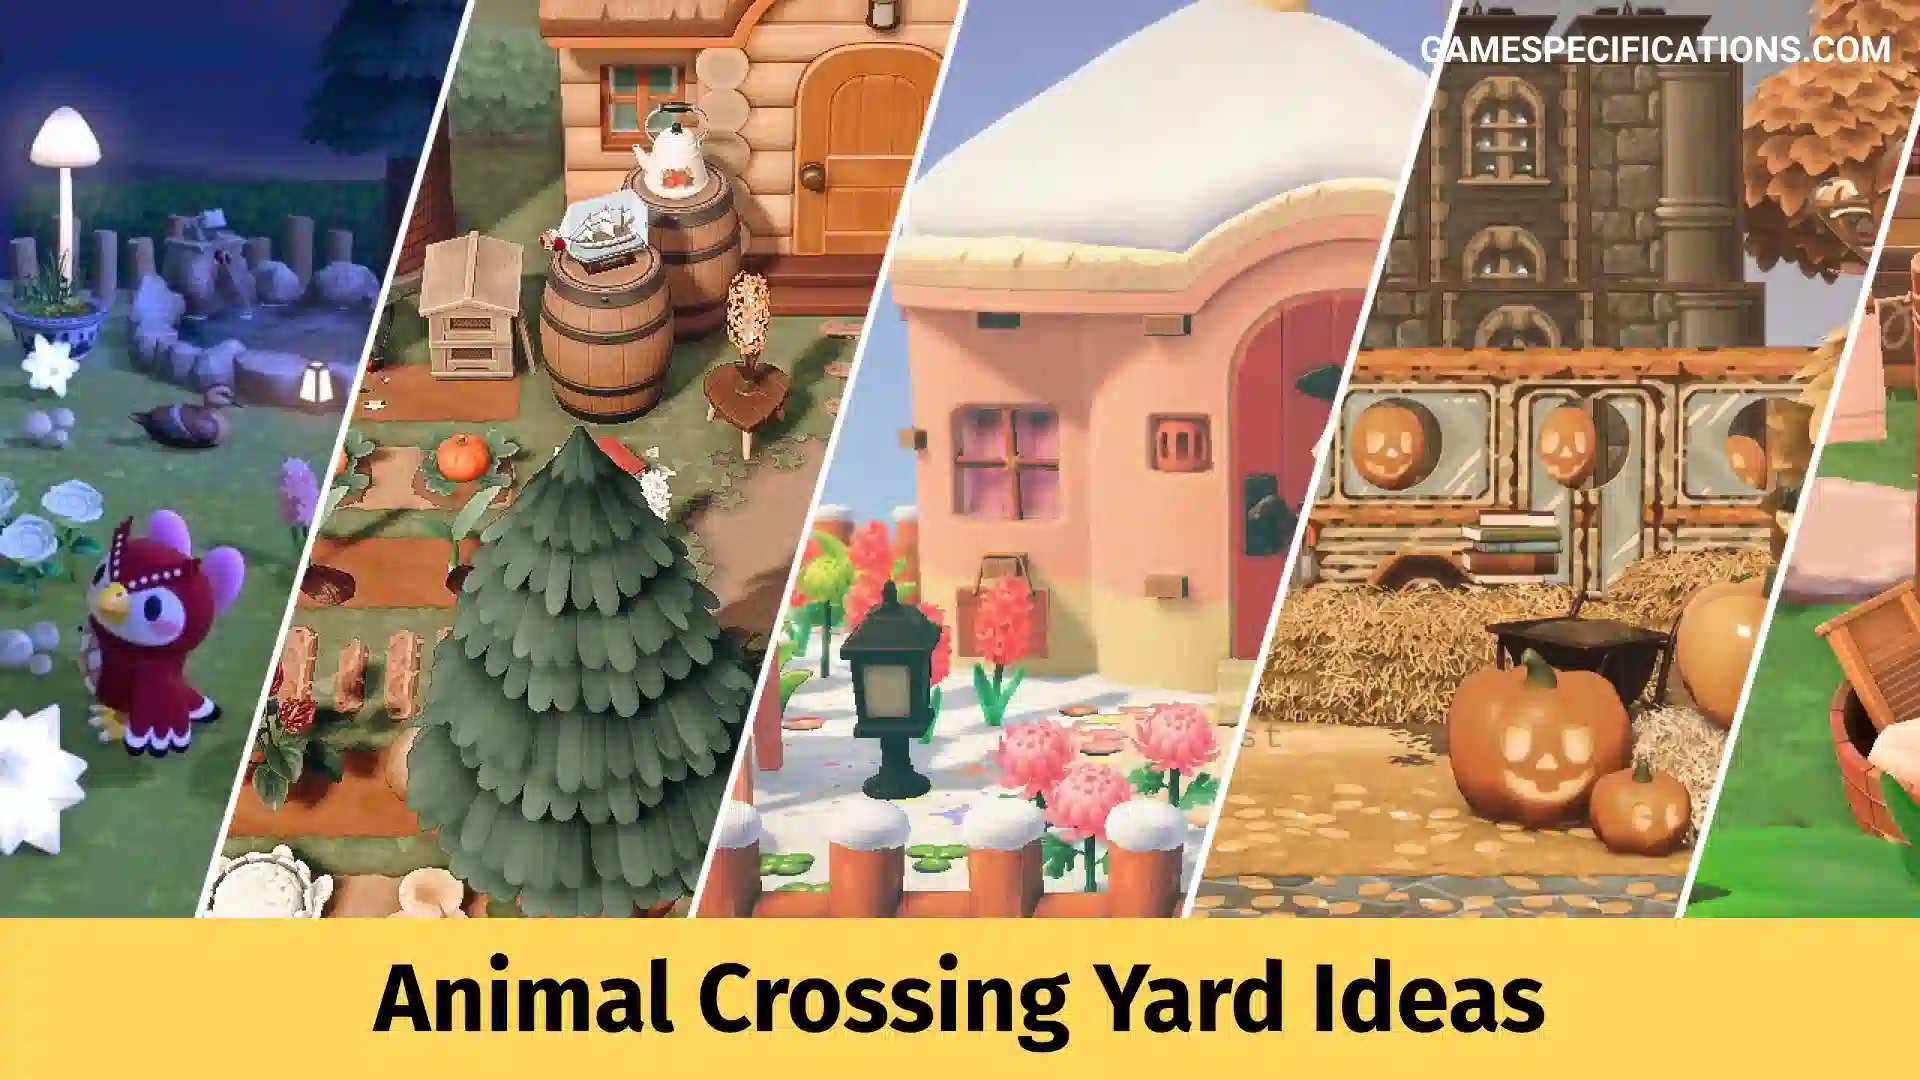 Amazing Animal Crossing Yard Ideas [20]   Game Specifications